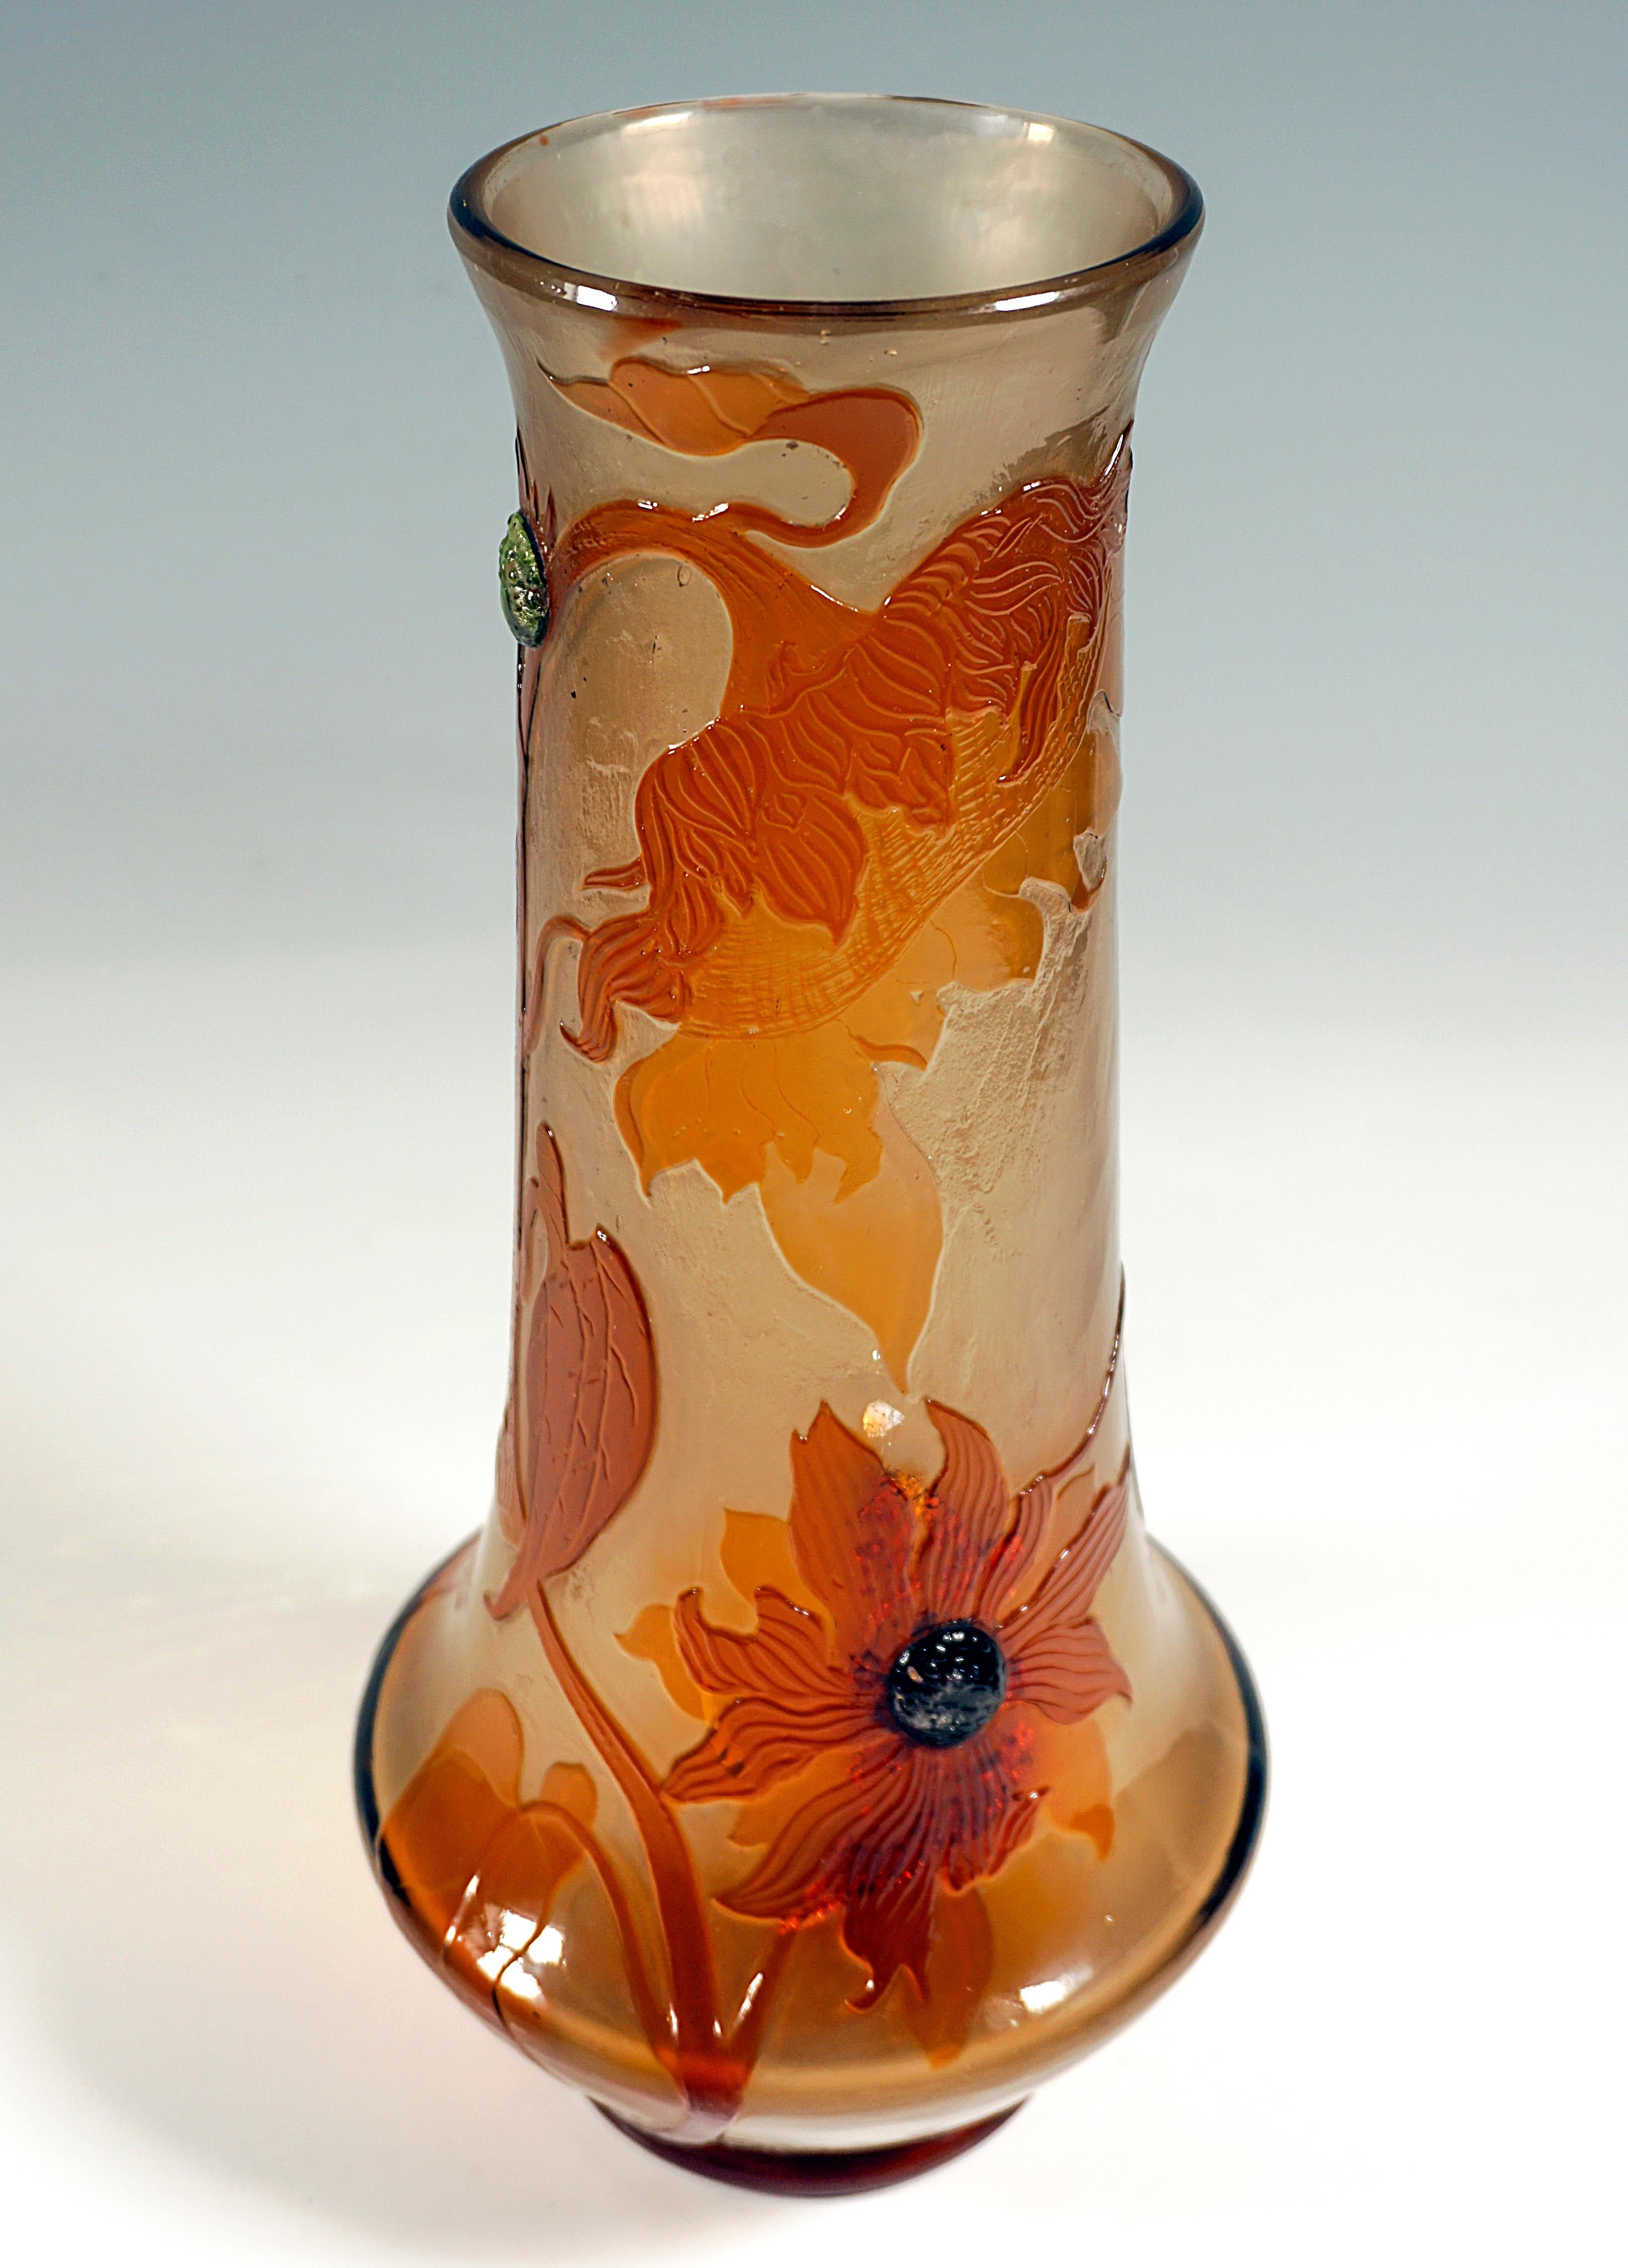 Large Émile Gallé Art Nouveau Cameo Vase 'Helianthe', Nancy, France, circa 1898 In Good Condition For Sale In Vienna, AT